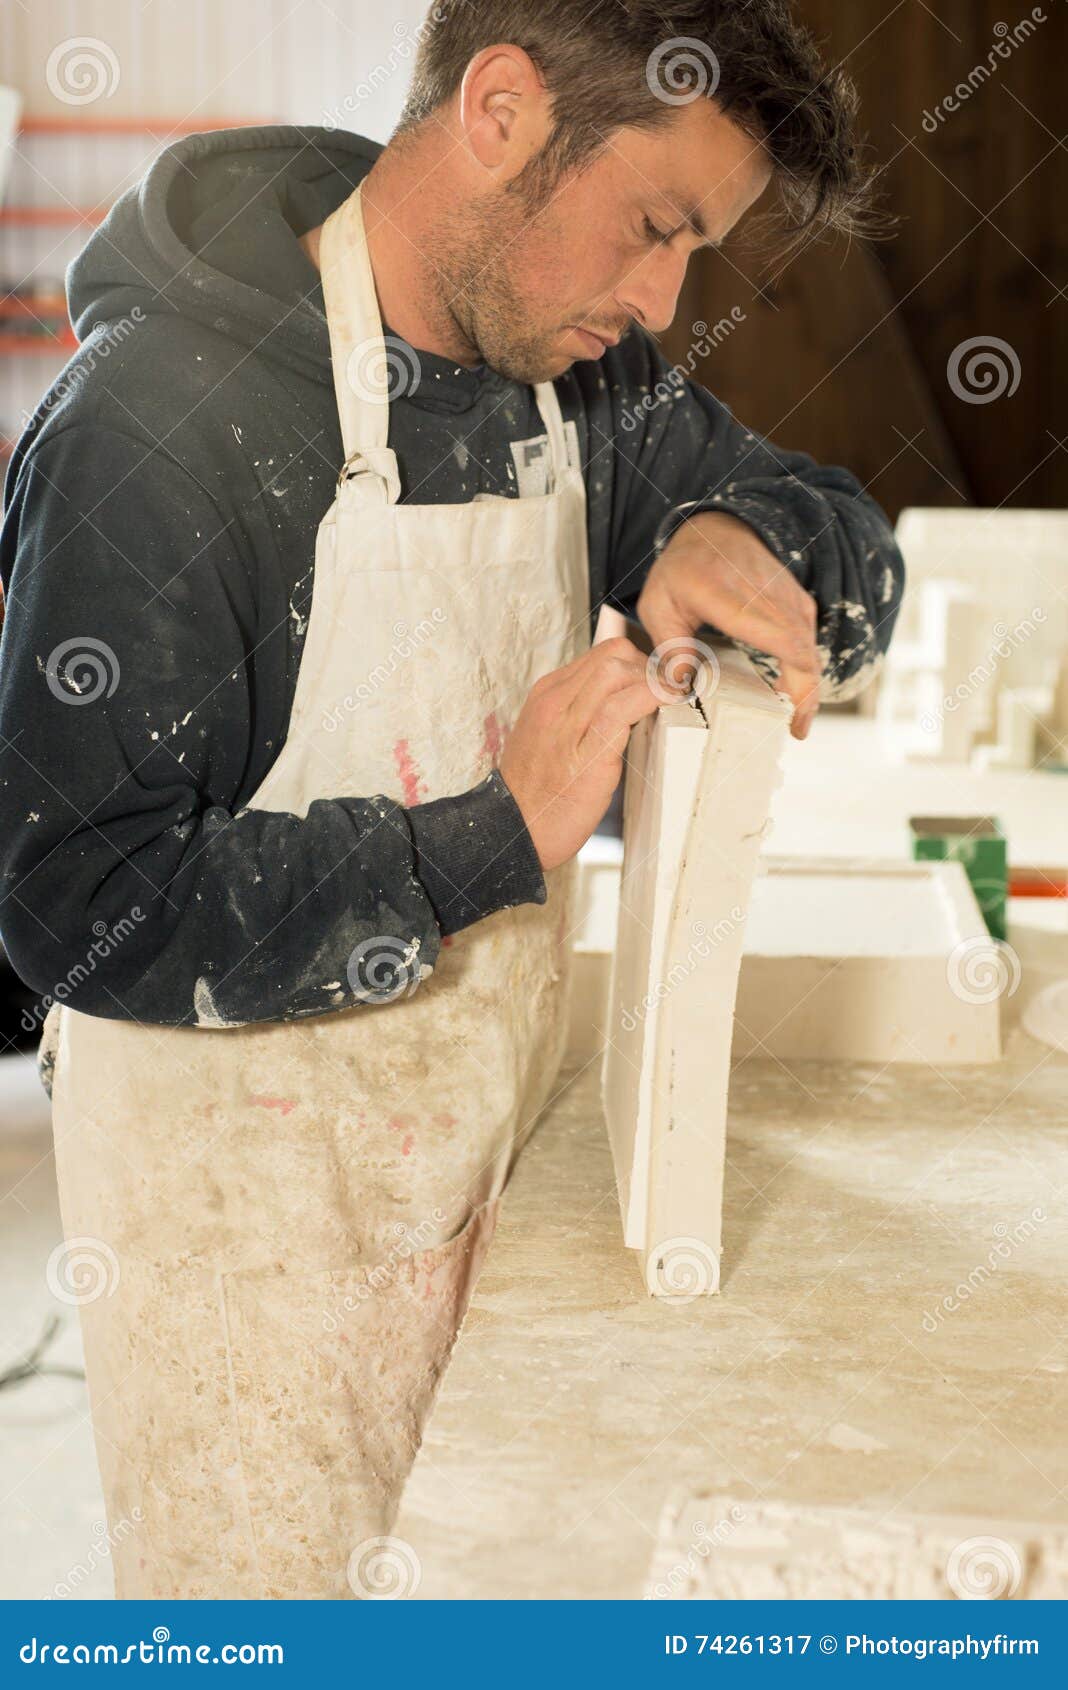 worker separating plaster model from mold